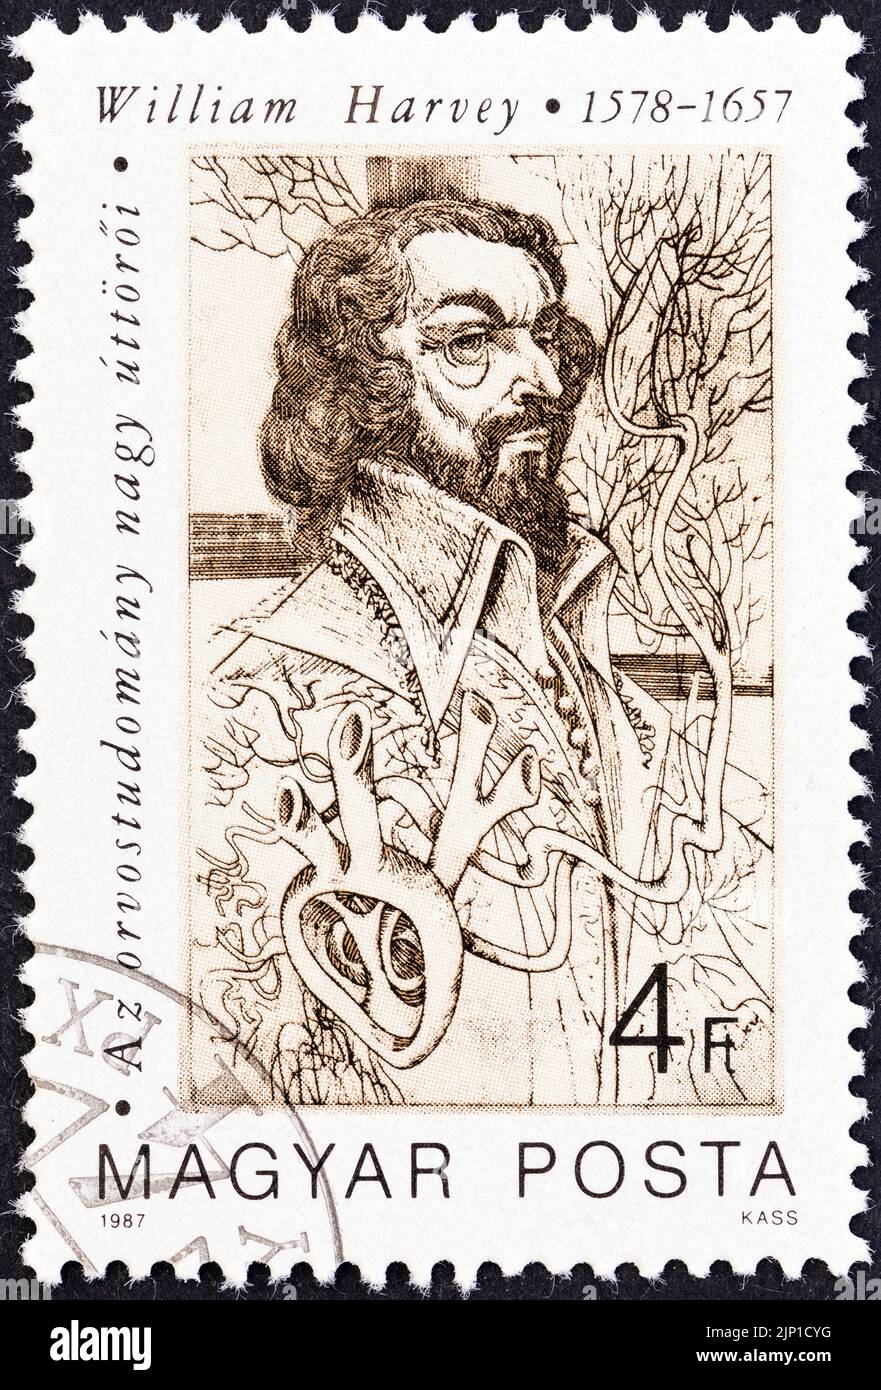 HUNGARY - CIRCA 1987: A stamp printed in Hungary from the 'Pioneers of Medicine' issue shows William Harvey (circulation of blood). Stock Photo